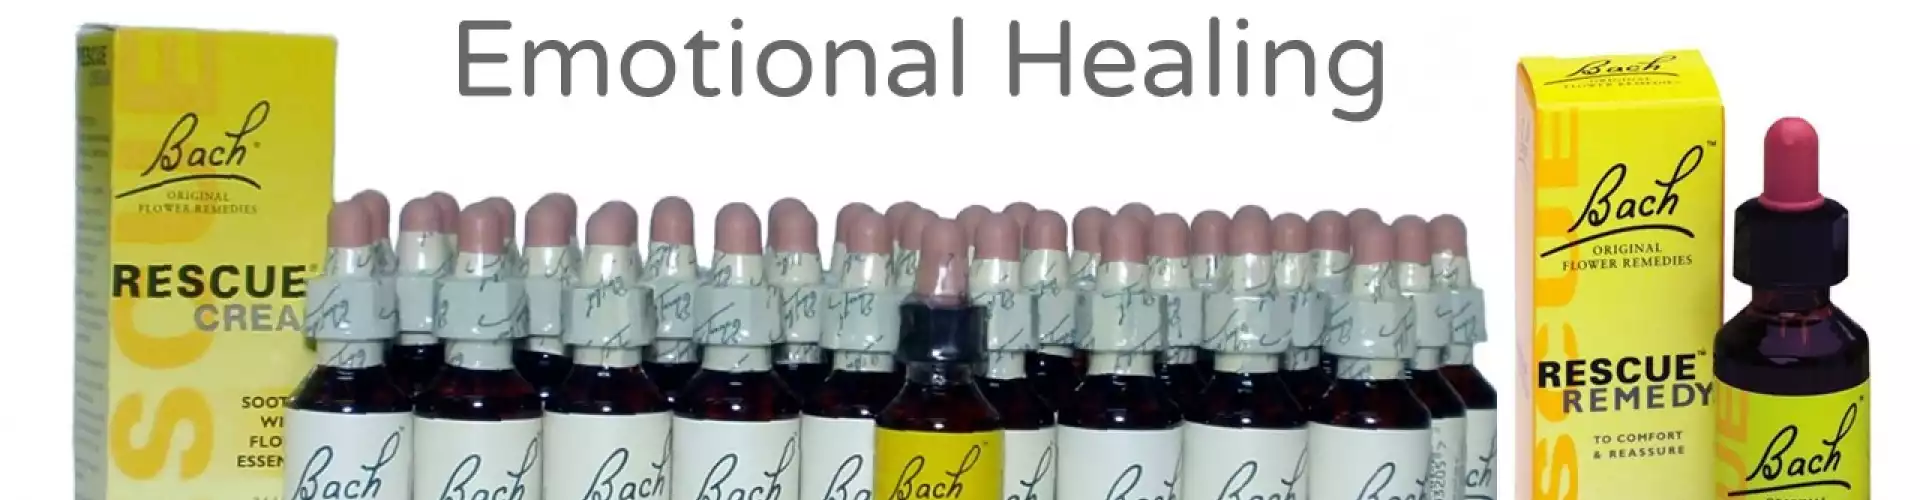 Bach Flower Remedies for Emotional Healing 101